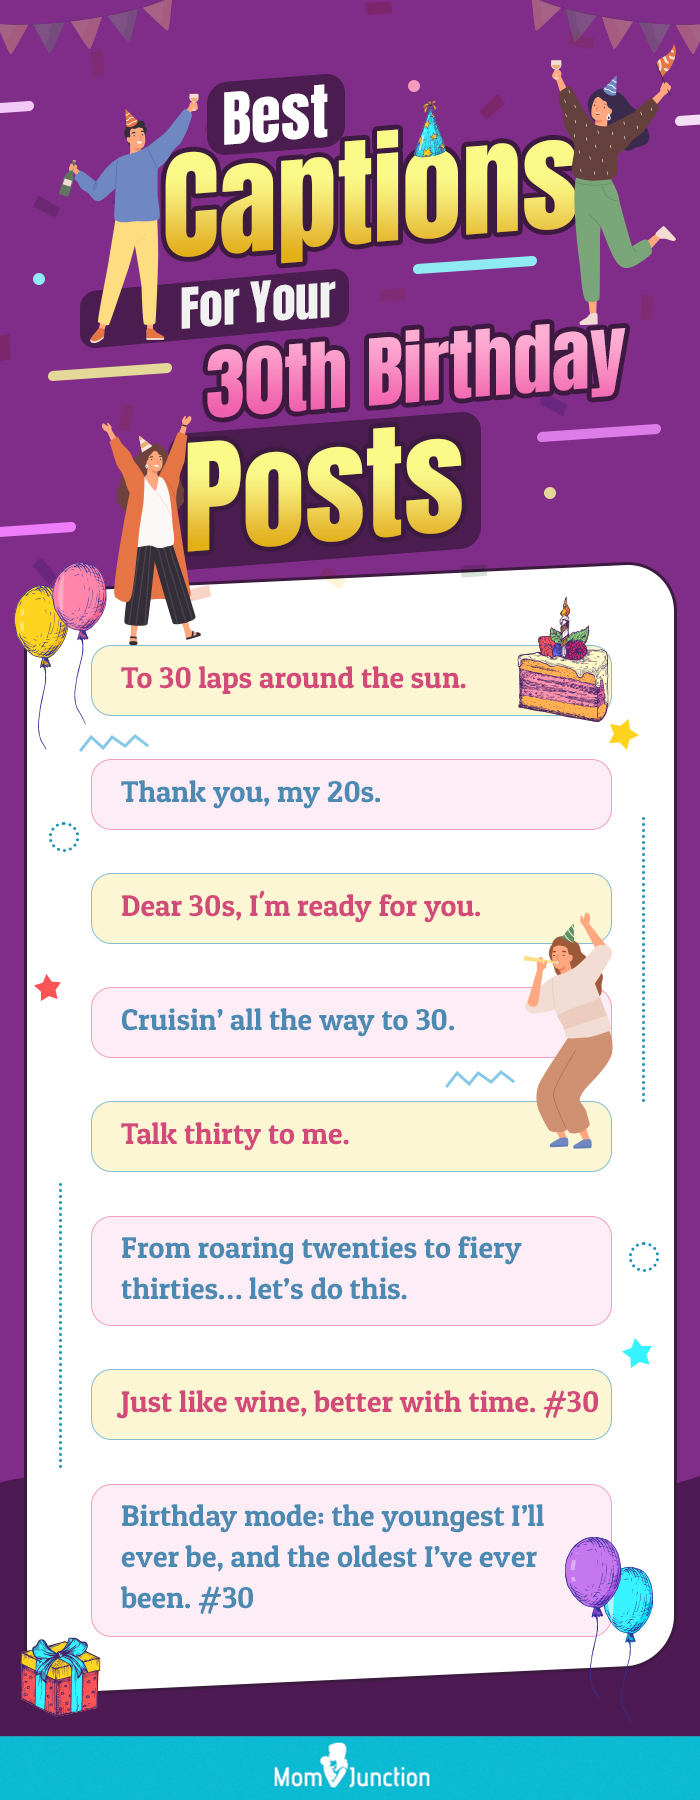 best captions for our 30th birthday posts [infographic]